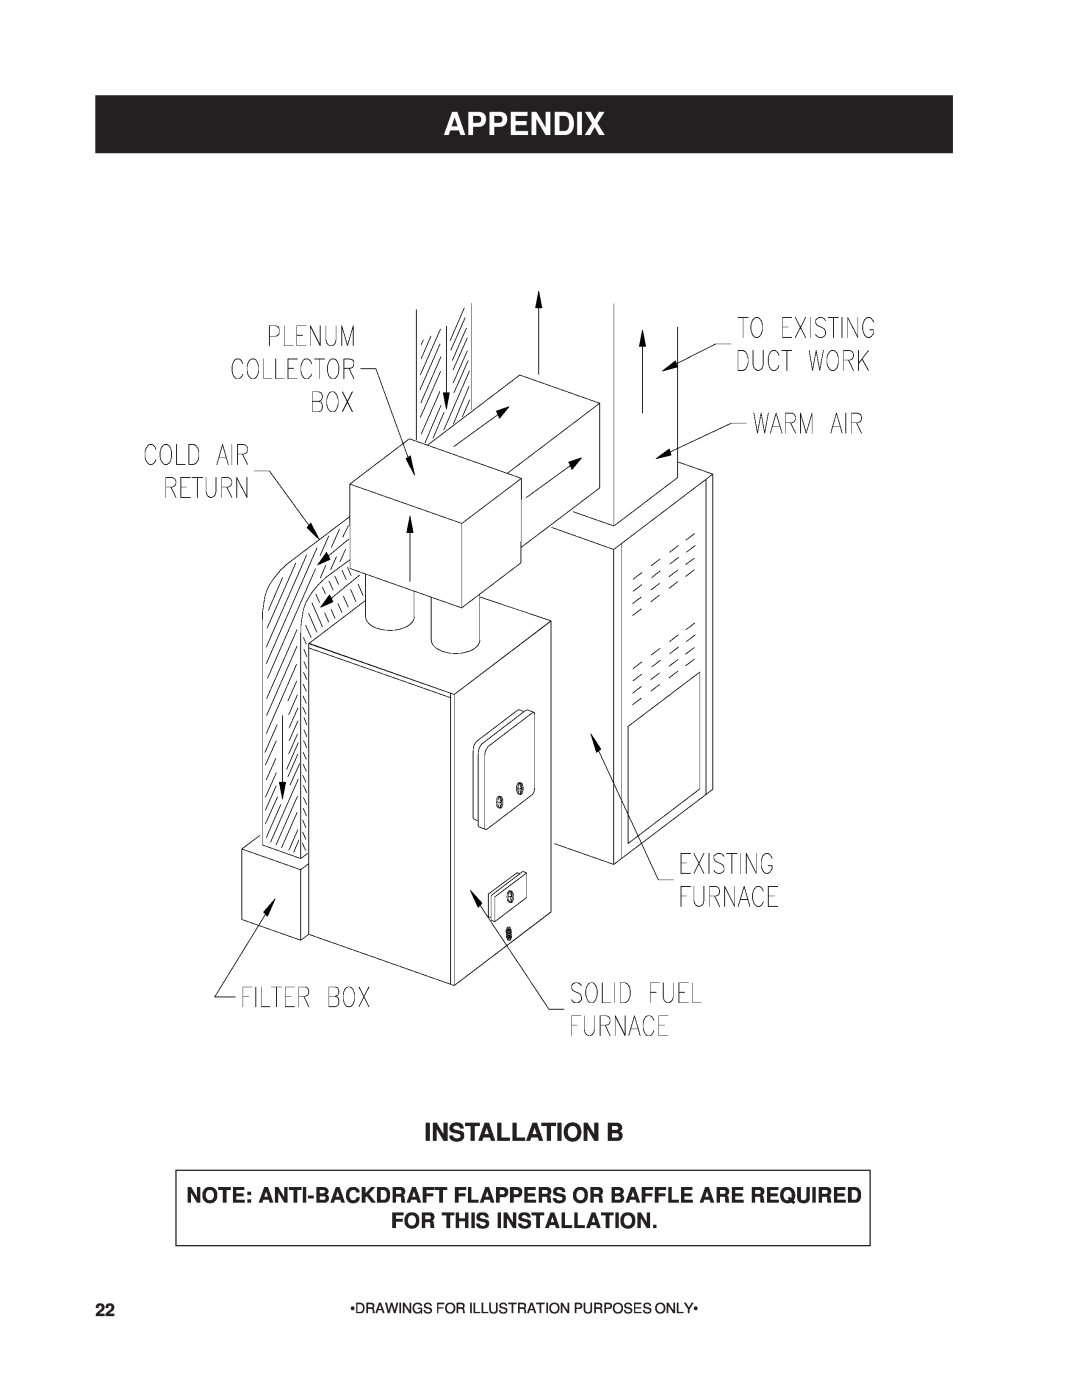 United States Stove 1200G Installation B, Appendix, For This Installation, Drawings For Illustration Purposes Only 